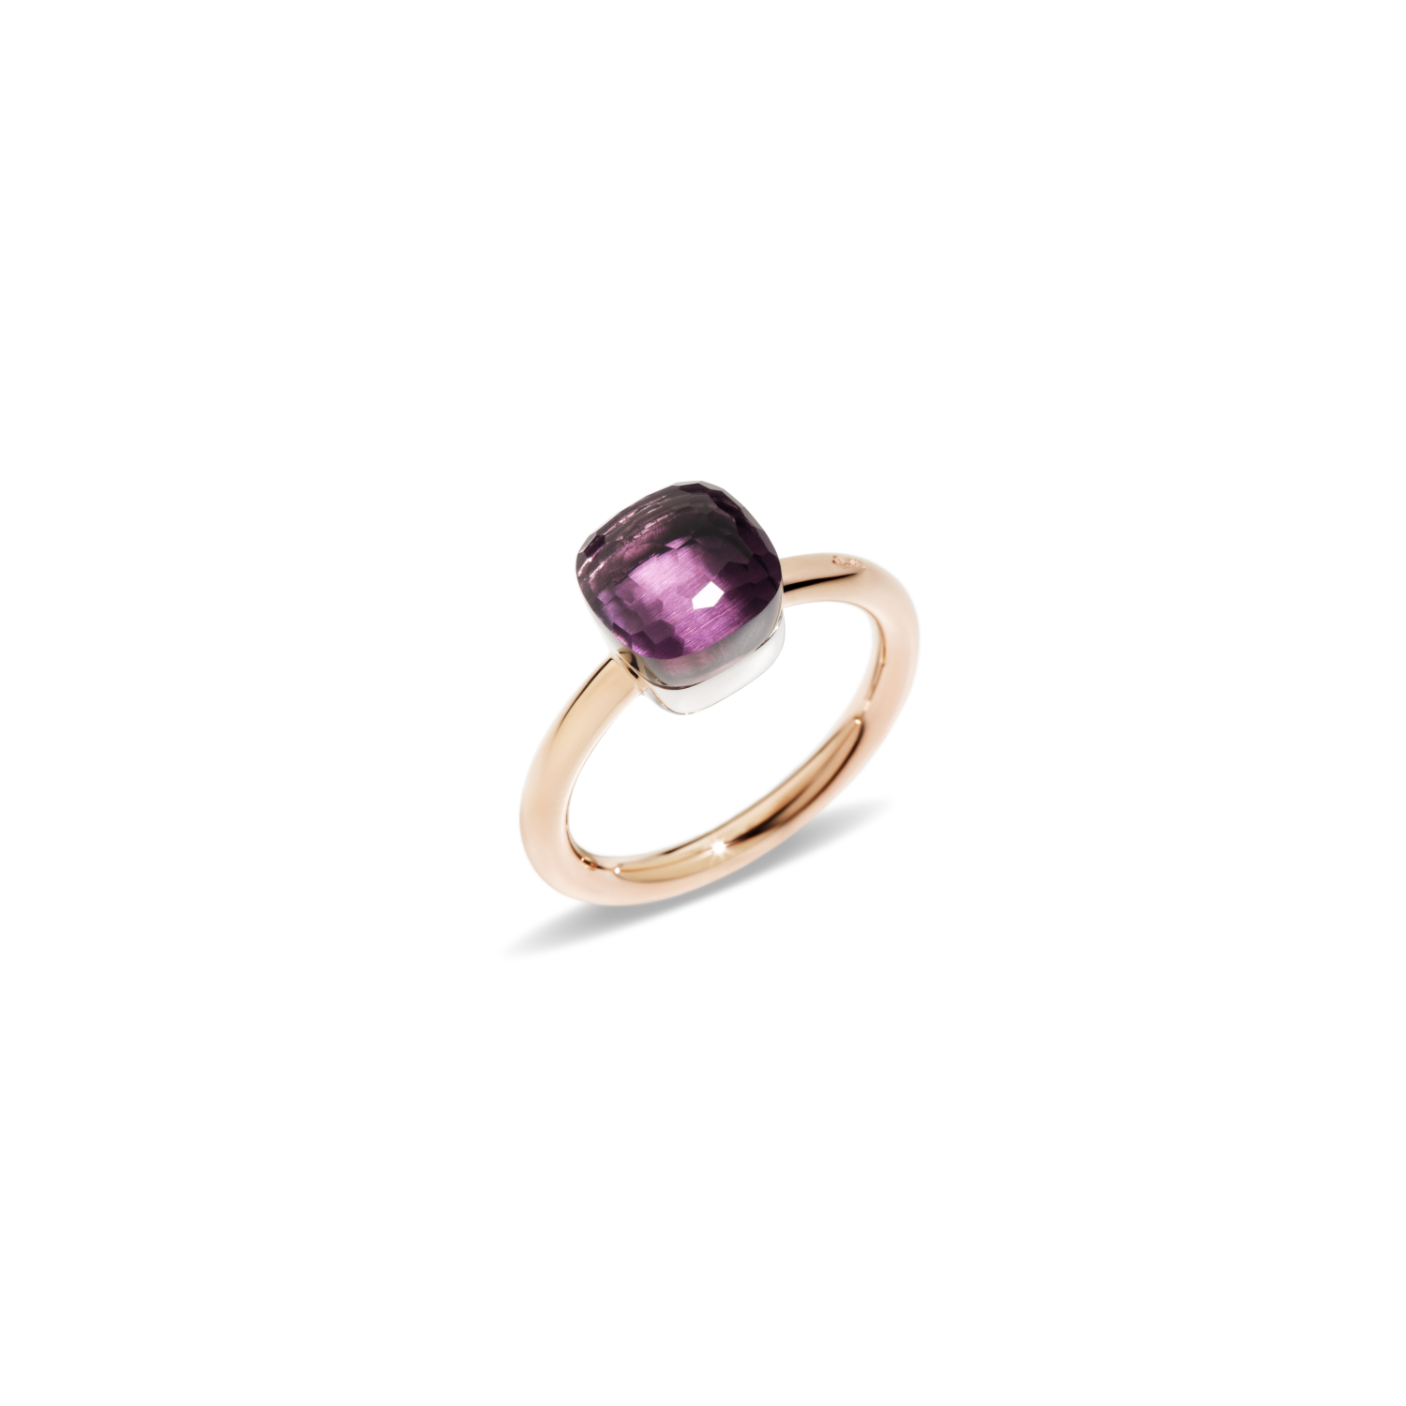 PAB4030_O6000_000OI_010_Pomellato_ring-nudo-petit-rose-gold-18kt-white-gold-18kt-amethyst.png